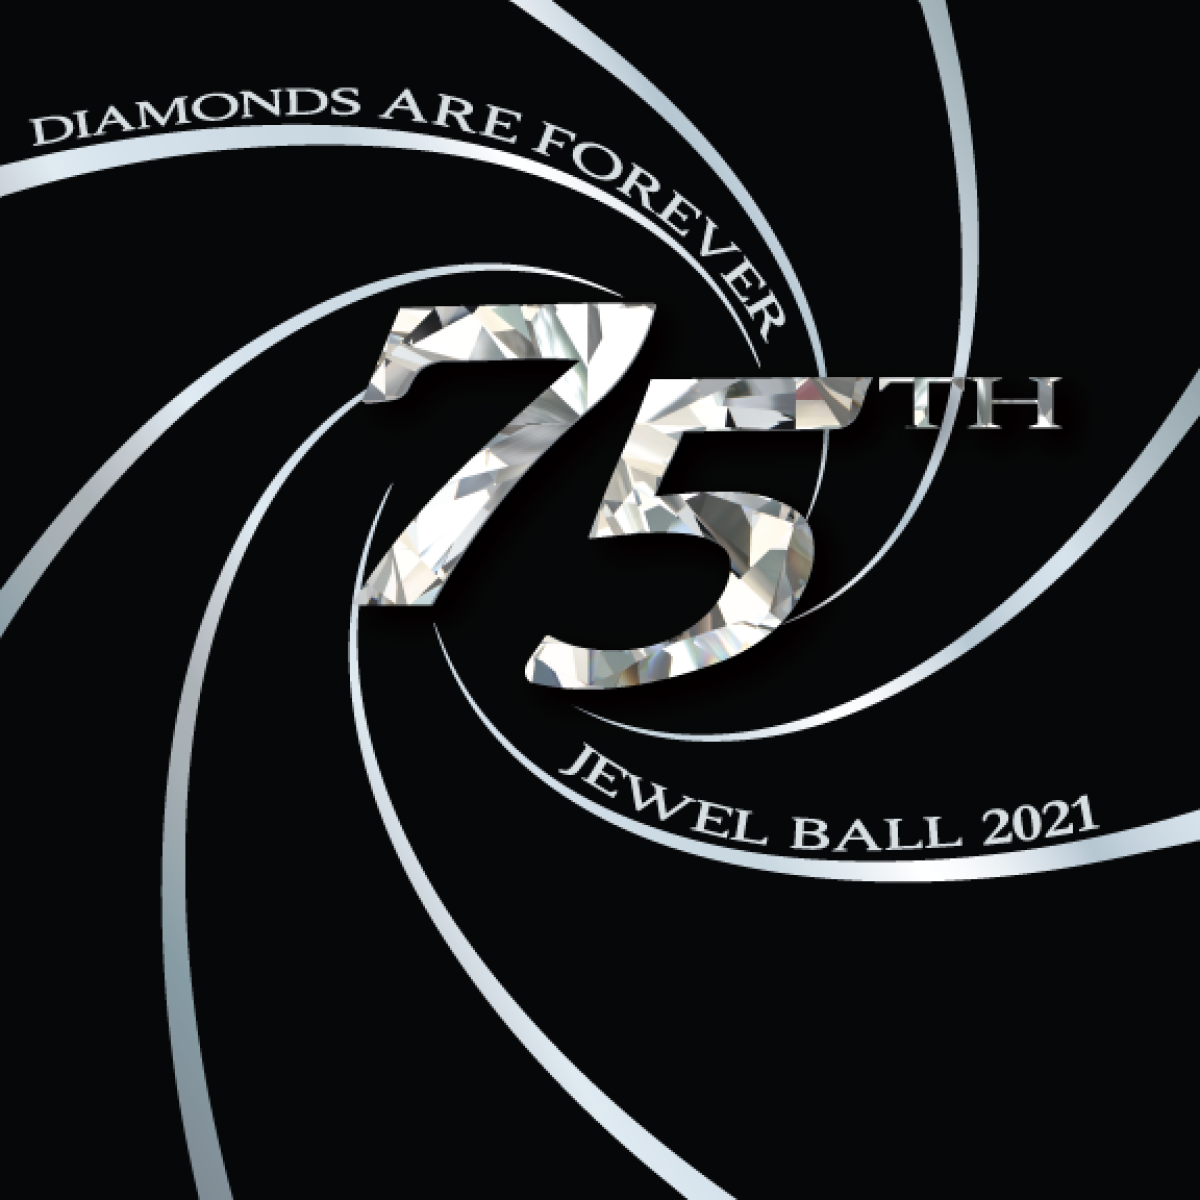 The 75th annual Jewel Ball is themed "Diamonds Are Forever."